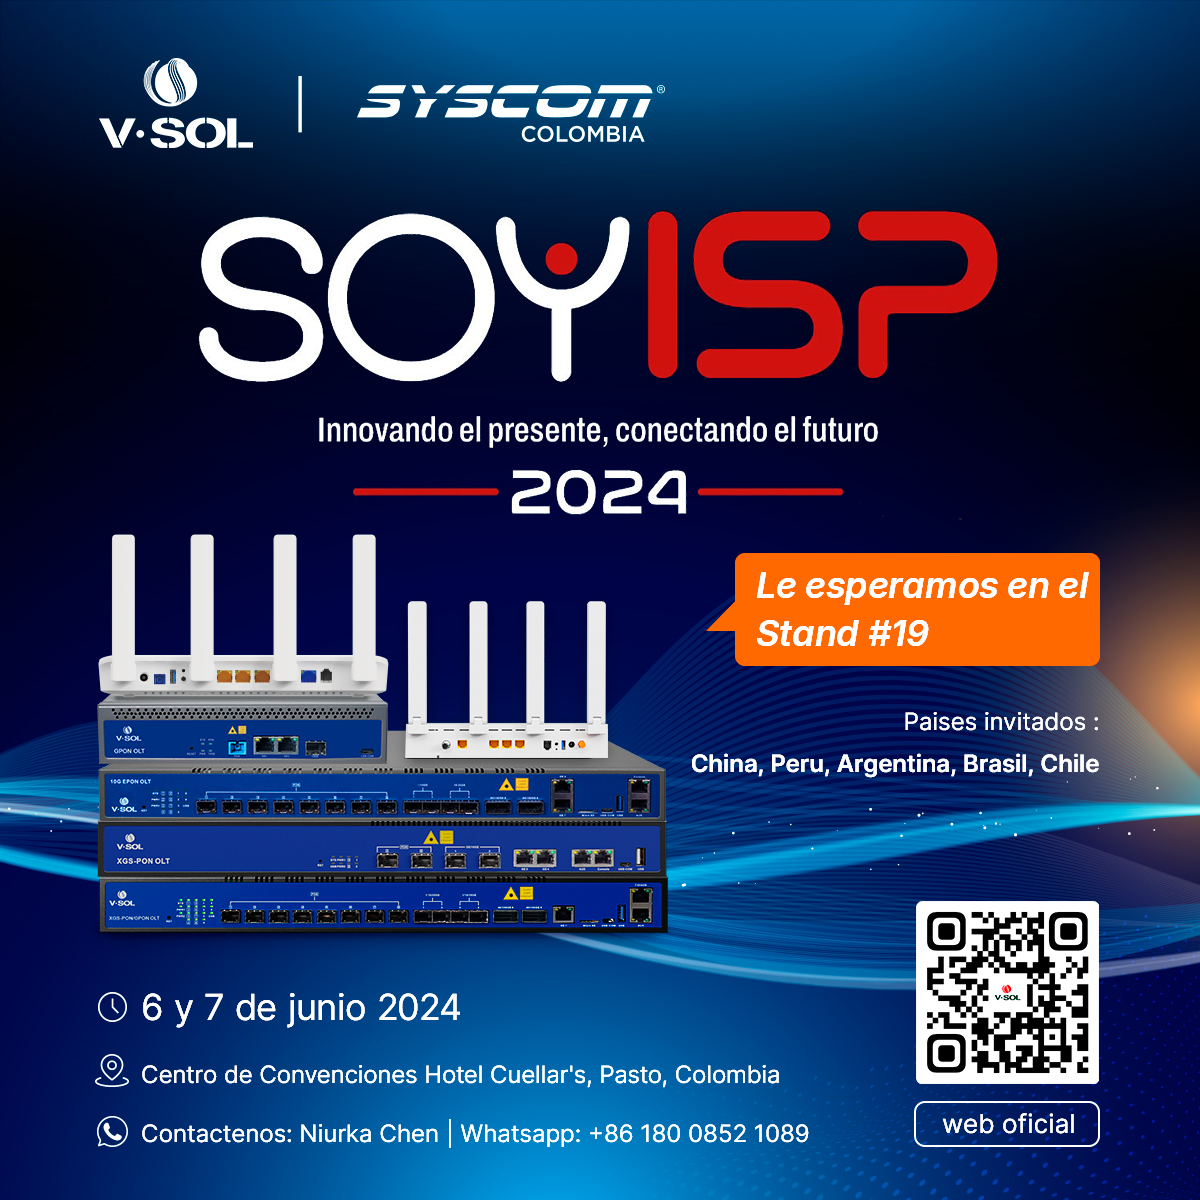 We're thrilled to announce that our Colombian partner, SYSCOM COLOMBIA, will be representing VSOL at EXPO SOYSIP 2024 on June 6-7, 2024! Join us at Stand #19 for a firsthand look at cutting-edge technology and see how we can elevate your network solutions. See you there!  #SOYSIP